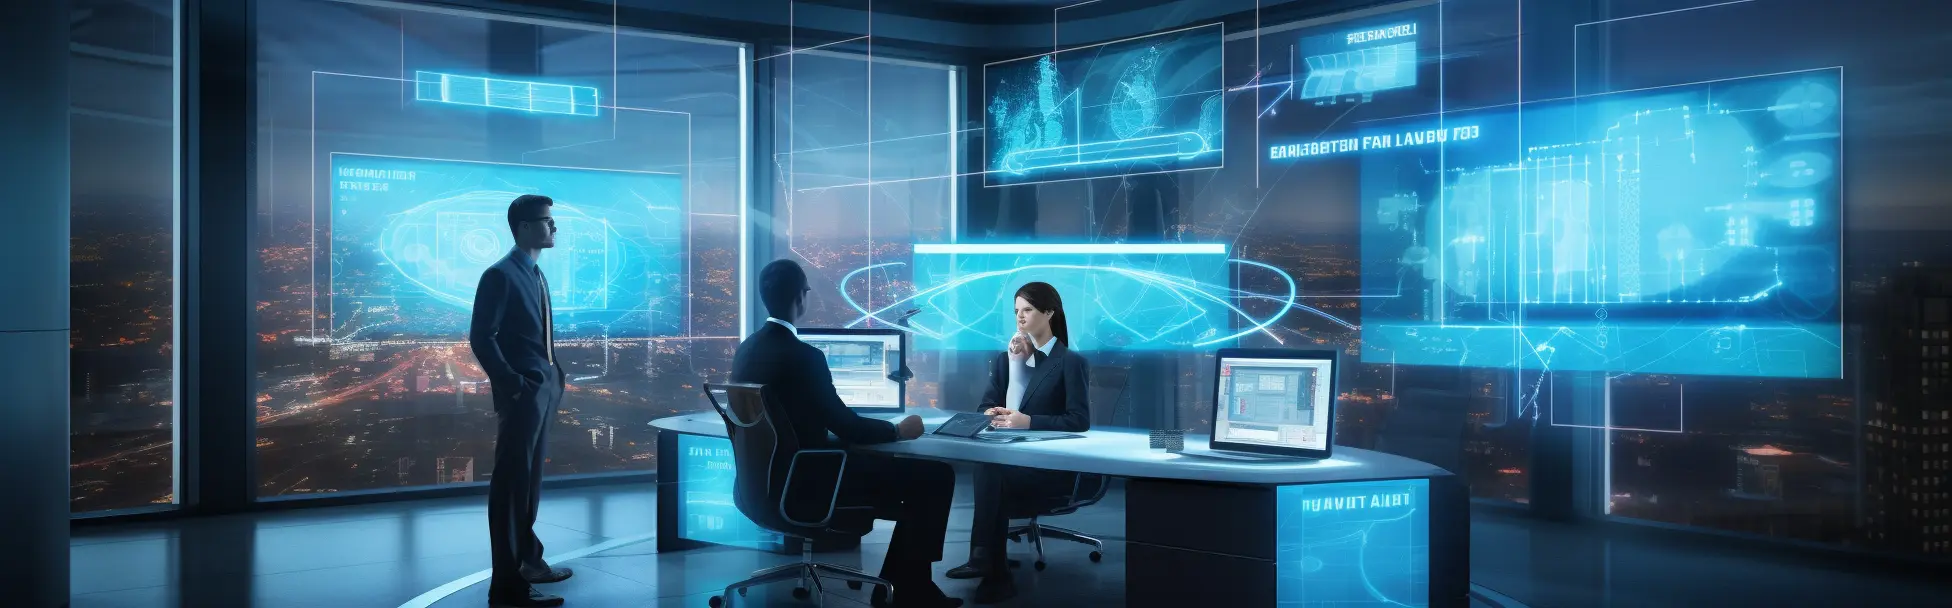 A high-tech digital consultation room with futuristic holographic displays showing various data visualizations. The room overlooks a sprawling cityscape at night, and includes three professionals: one standing and two seated at a modern desk, engaged in a strategic discussion.